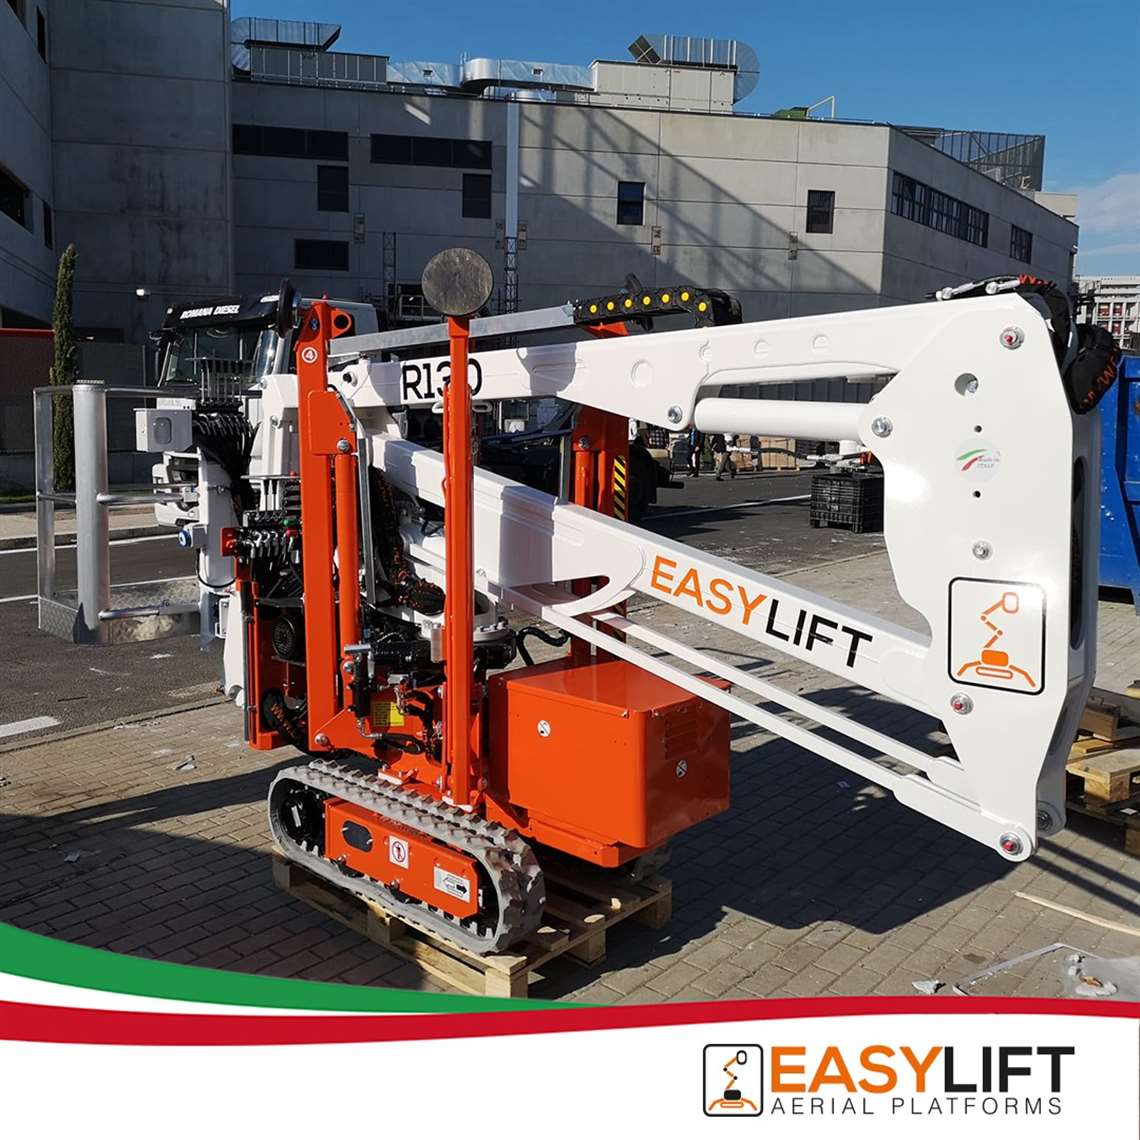 One of the R130BA access platform delivered to Maximo shopping mall in Rome, Italy.